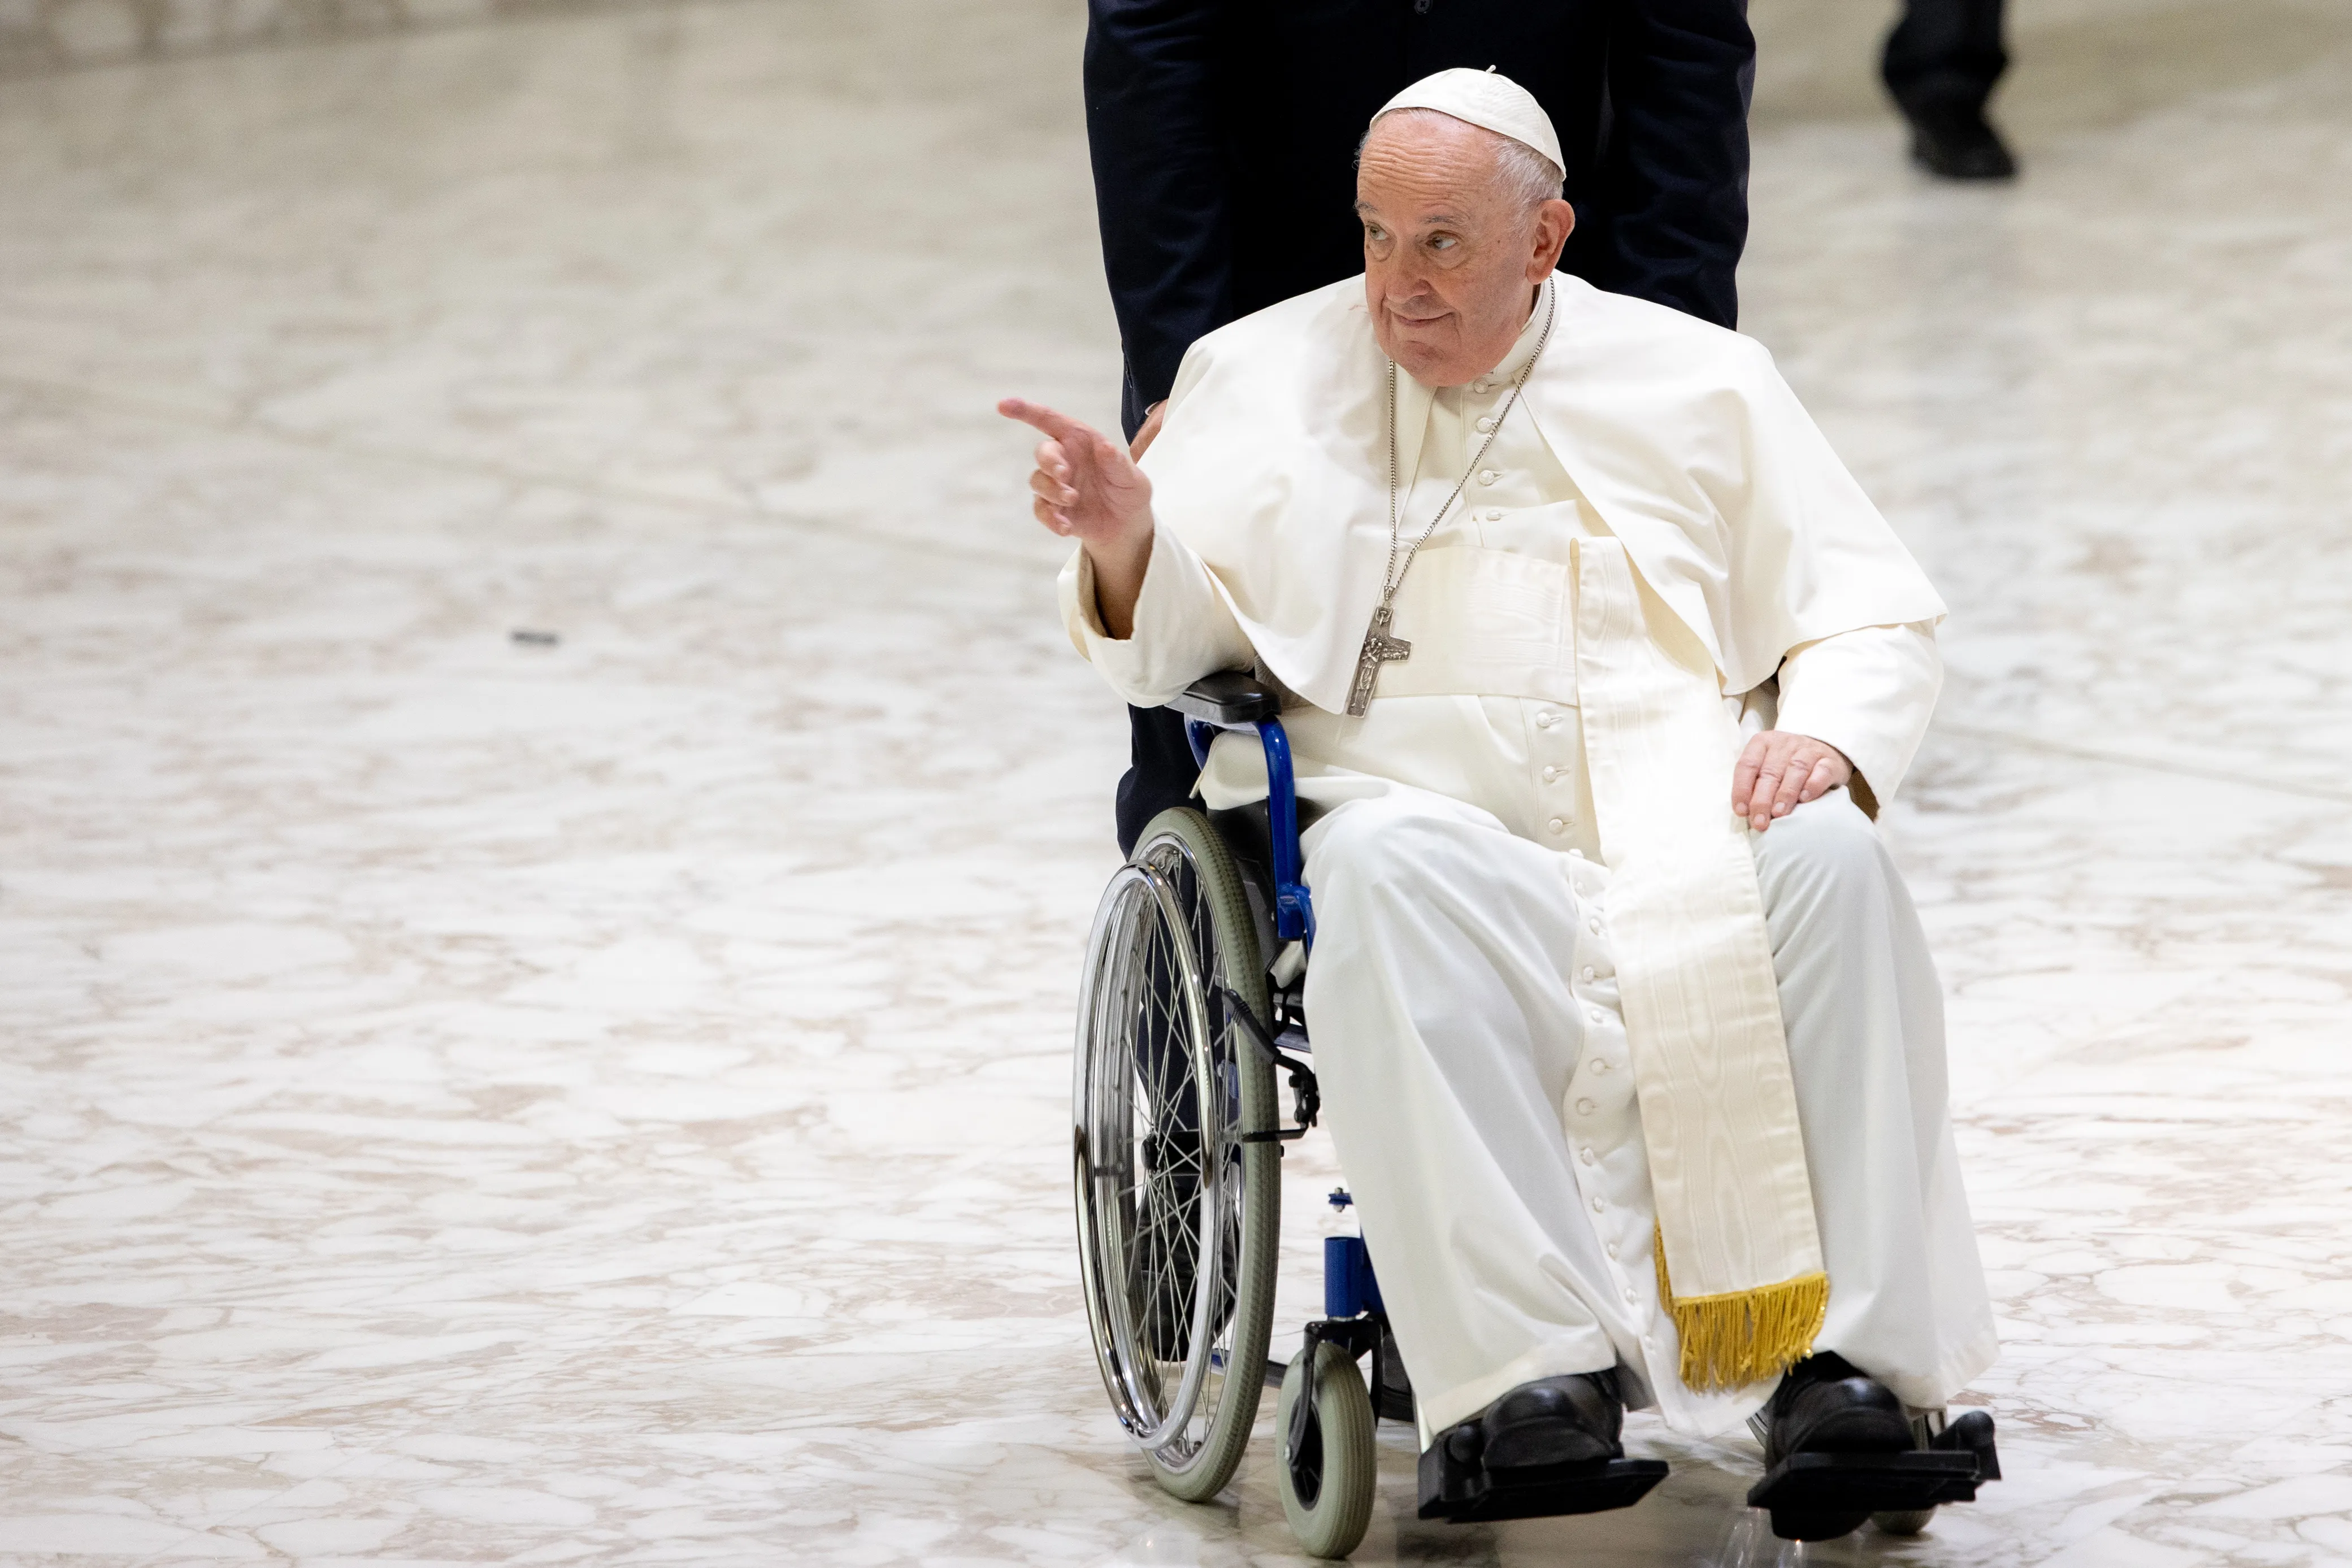 Pope Francis greeted the crowd in a wheelchair at the end of his general audience on Aug. 3, 2022. Daniel Ibanez/CNA